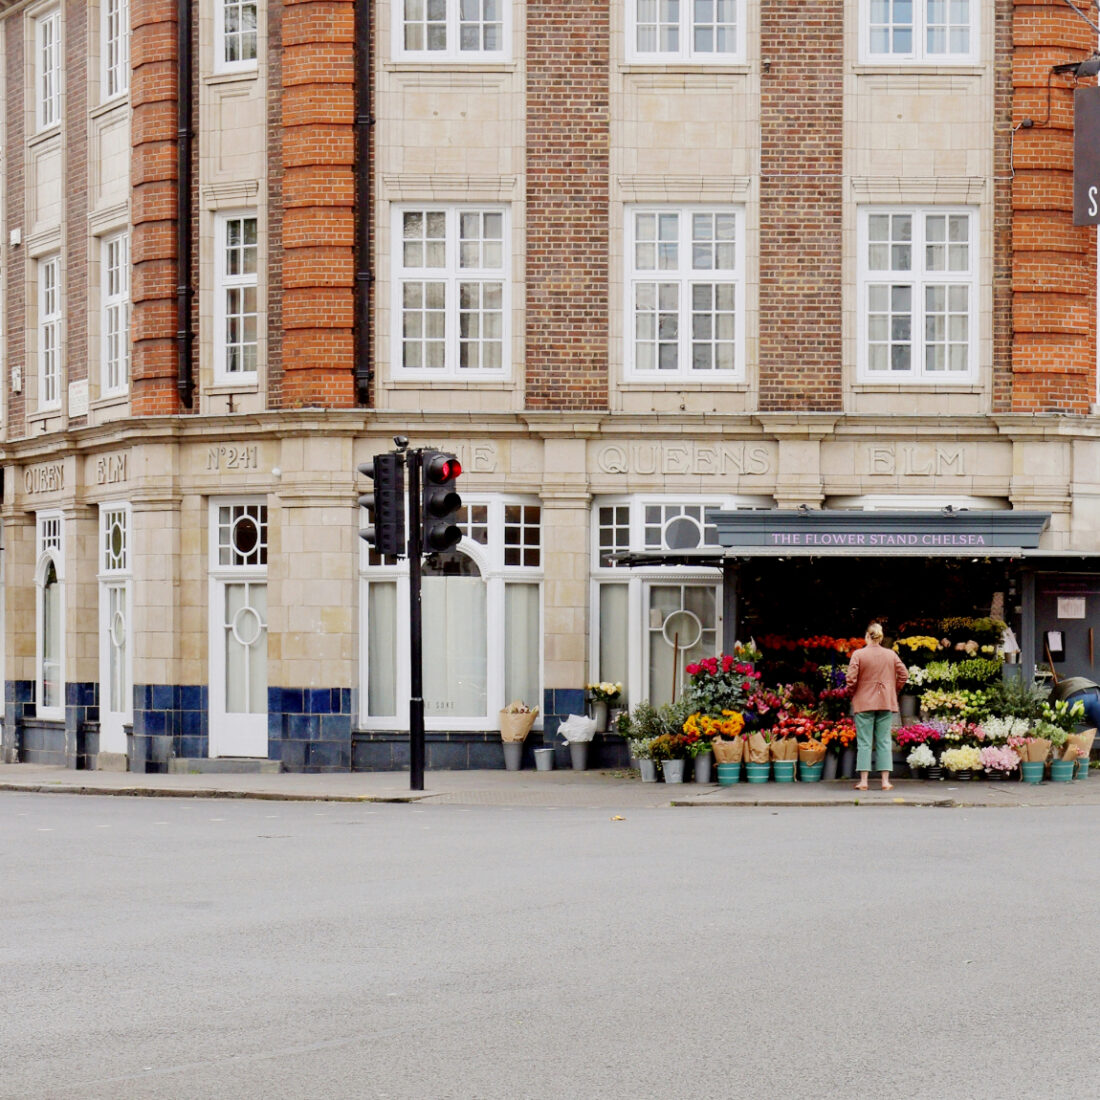 Shopfronts in Chelsea - The Best of the Best | Sloane Stanley